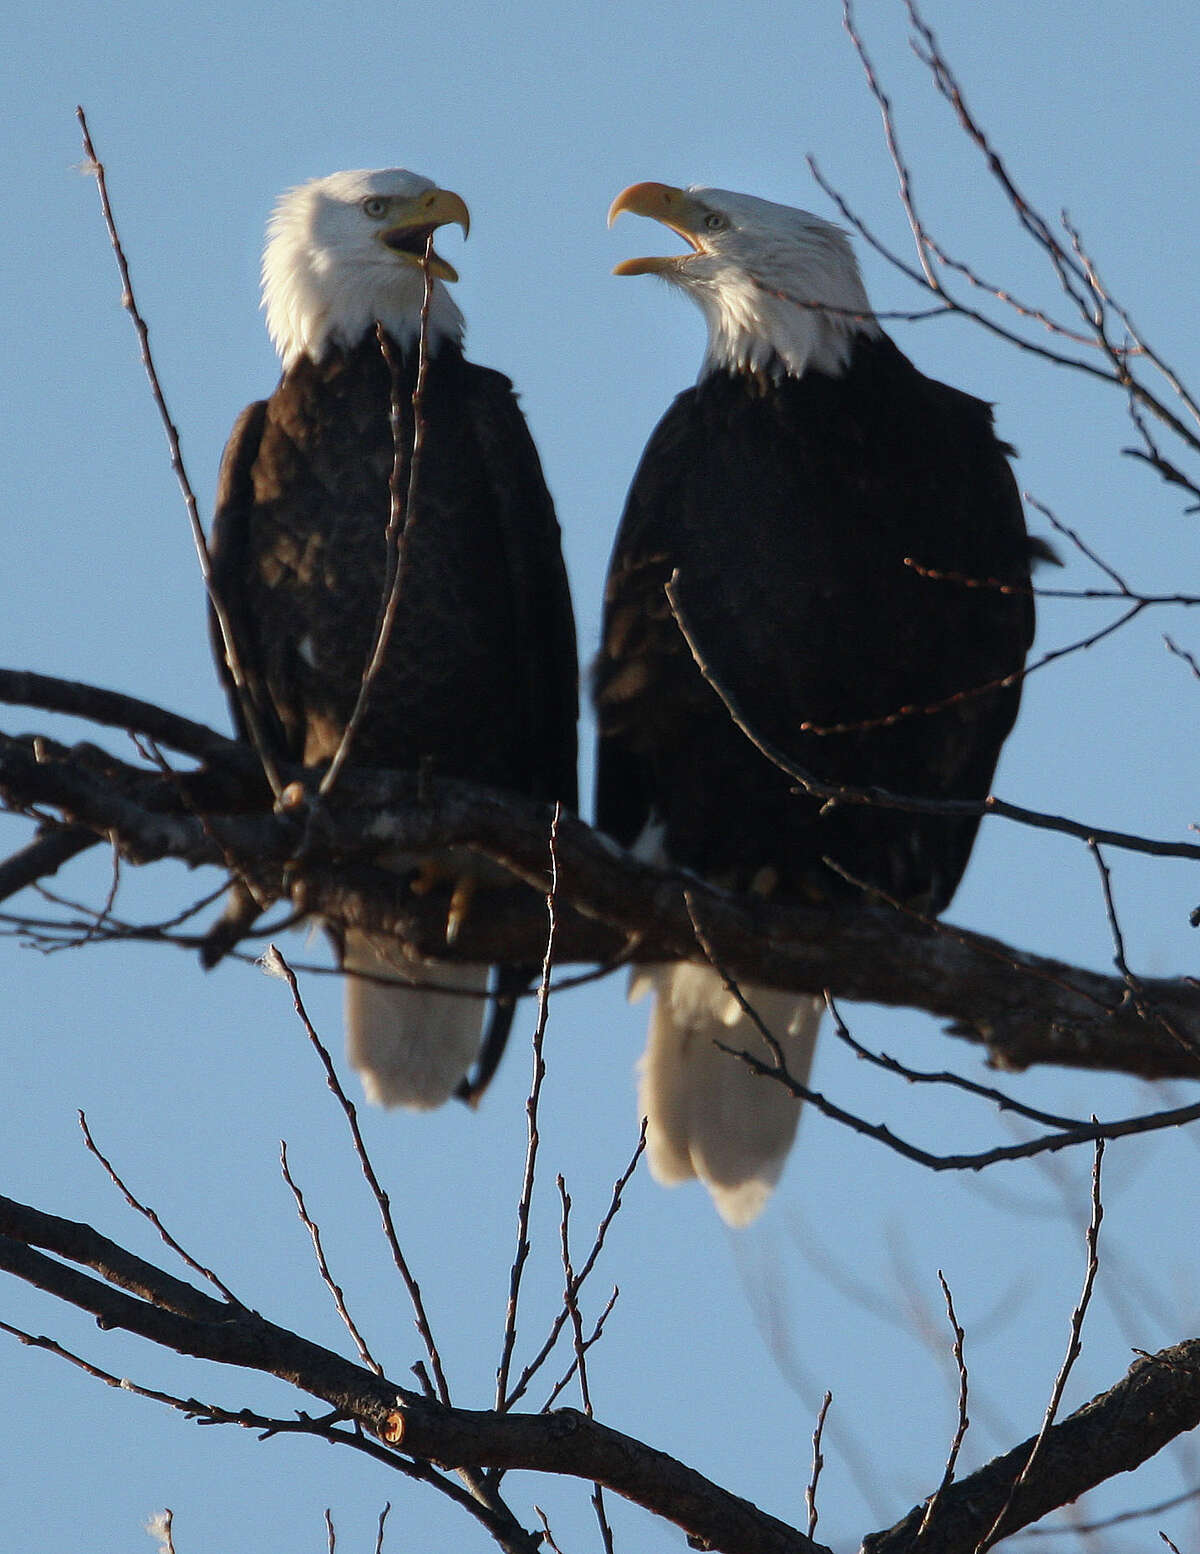 A pair of bald eagles squawk while perched in a cottonwood snag in the Klamath Basin National Wildlife Refuge.